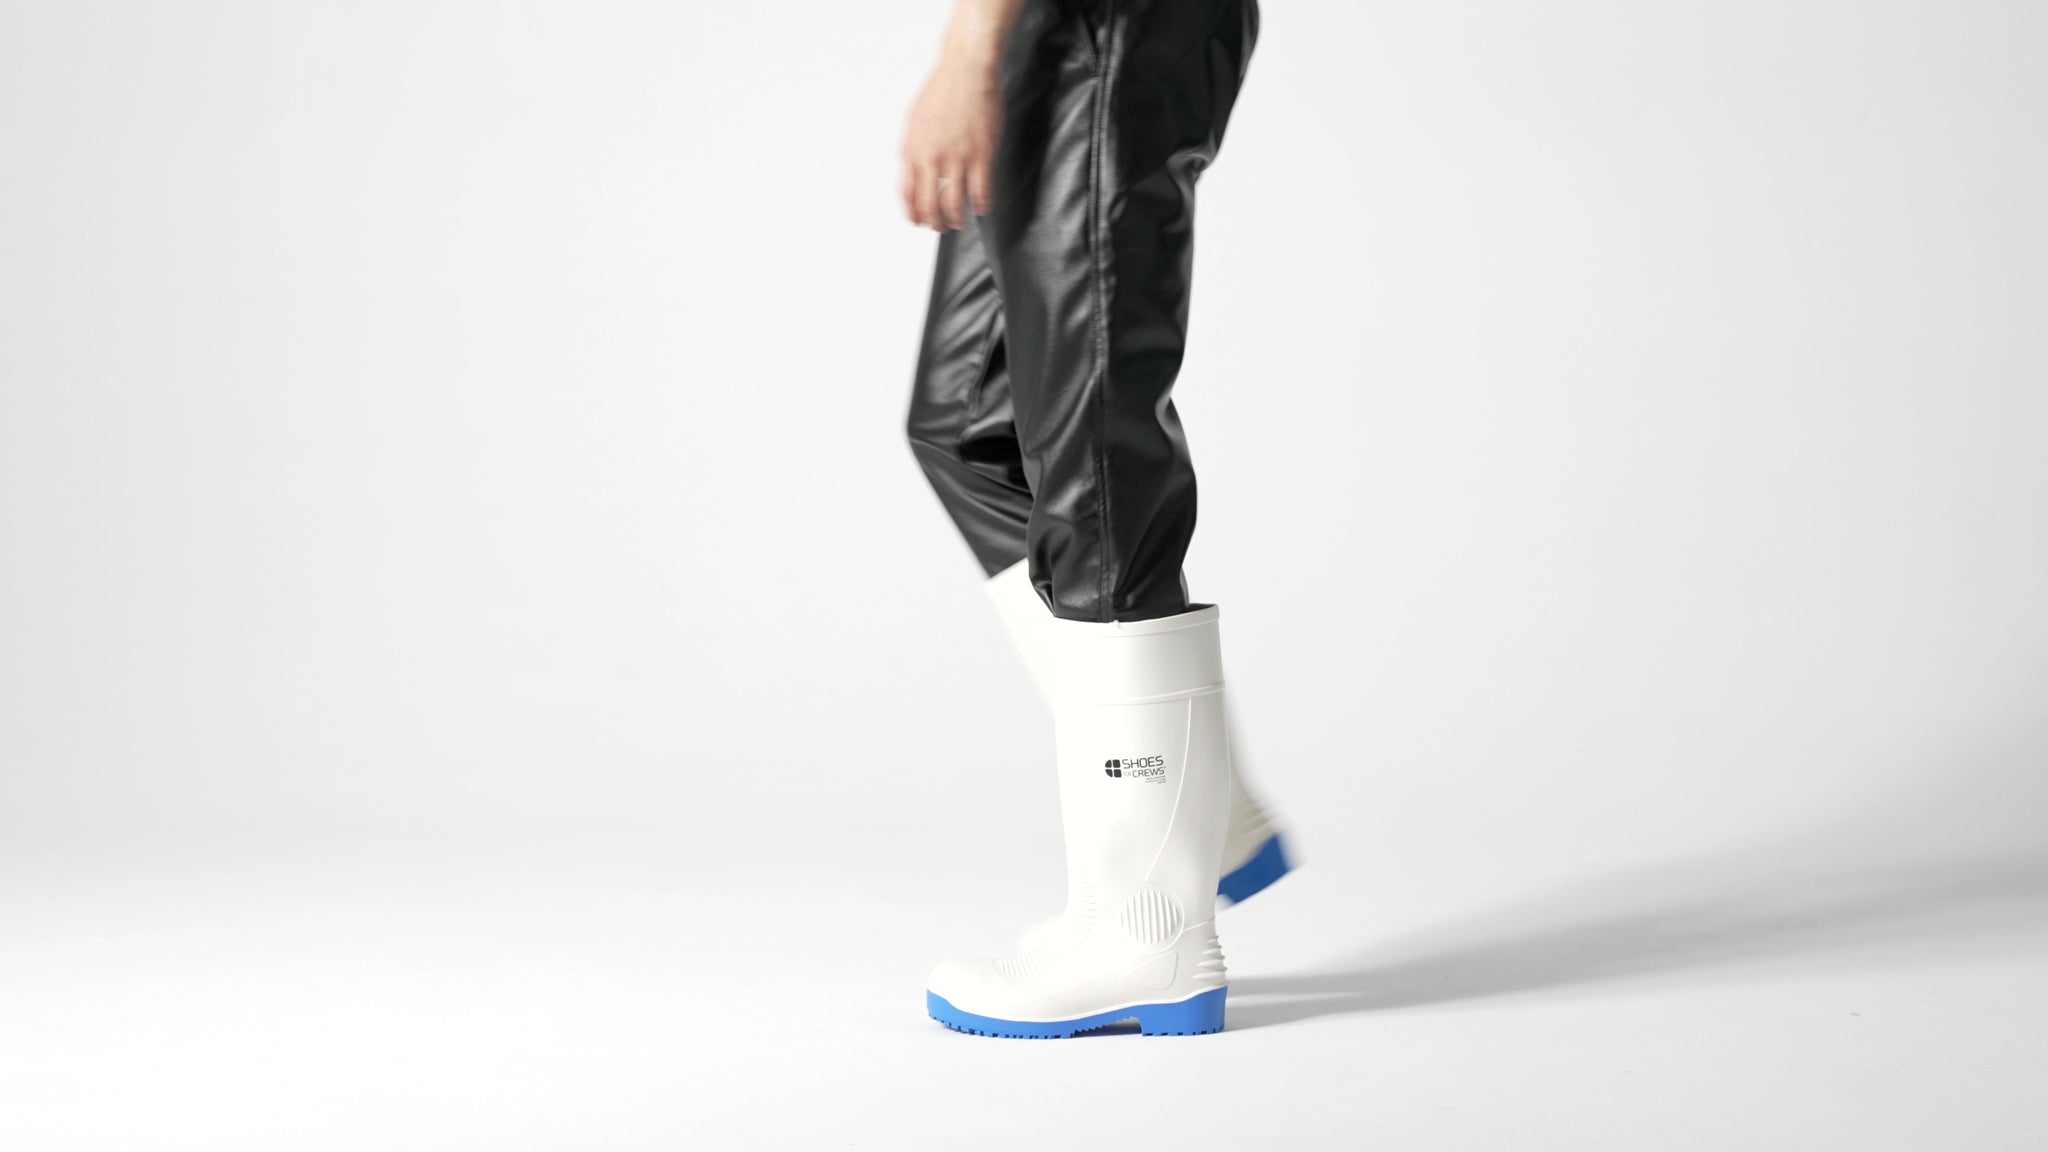 Slip resistant white wellington boot with steel toe cap (200 Joules) and water resistant upper, product video.